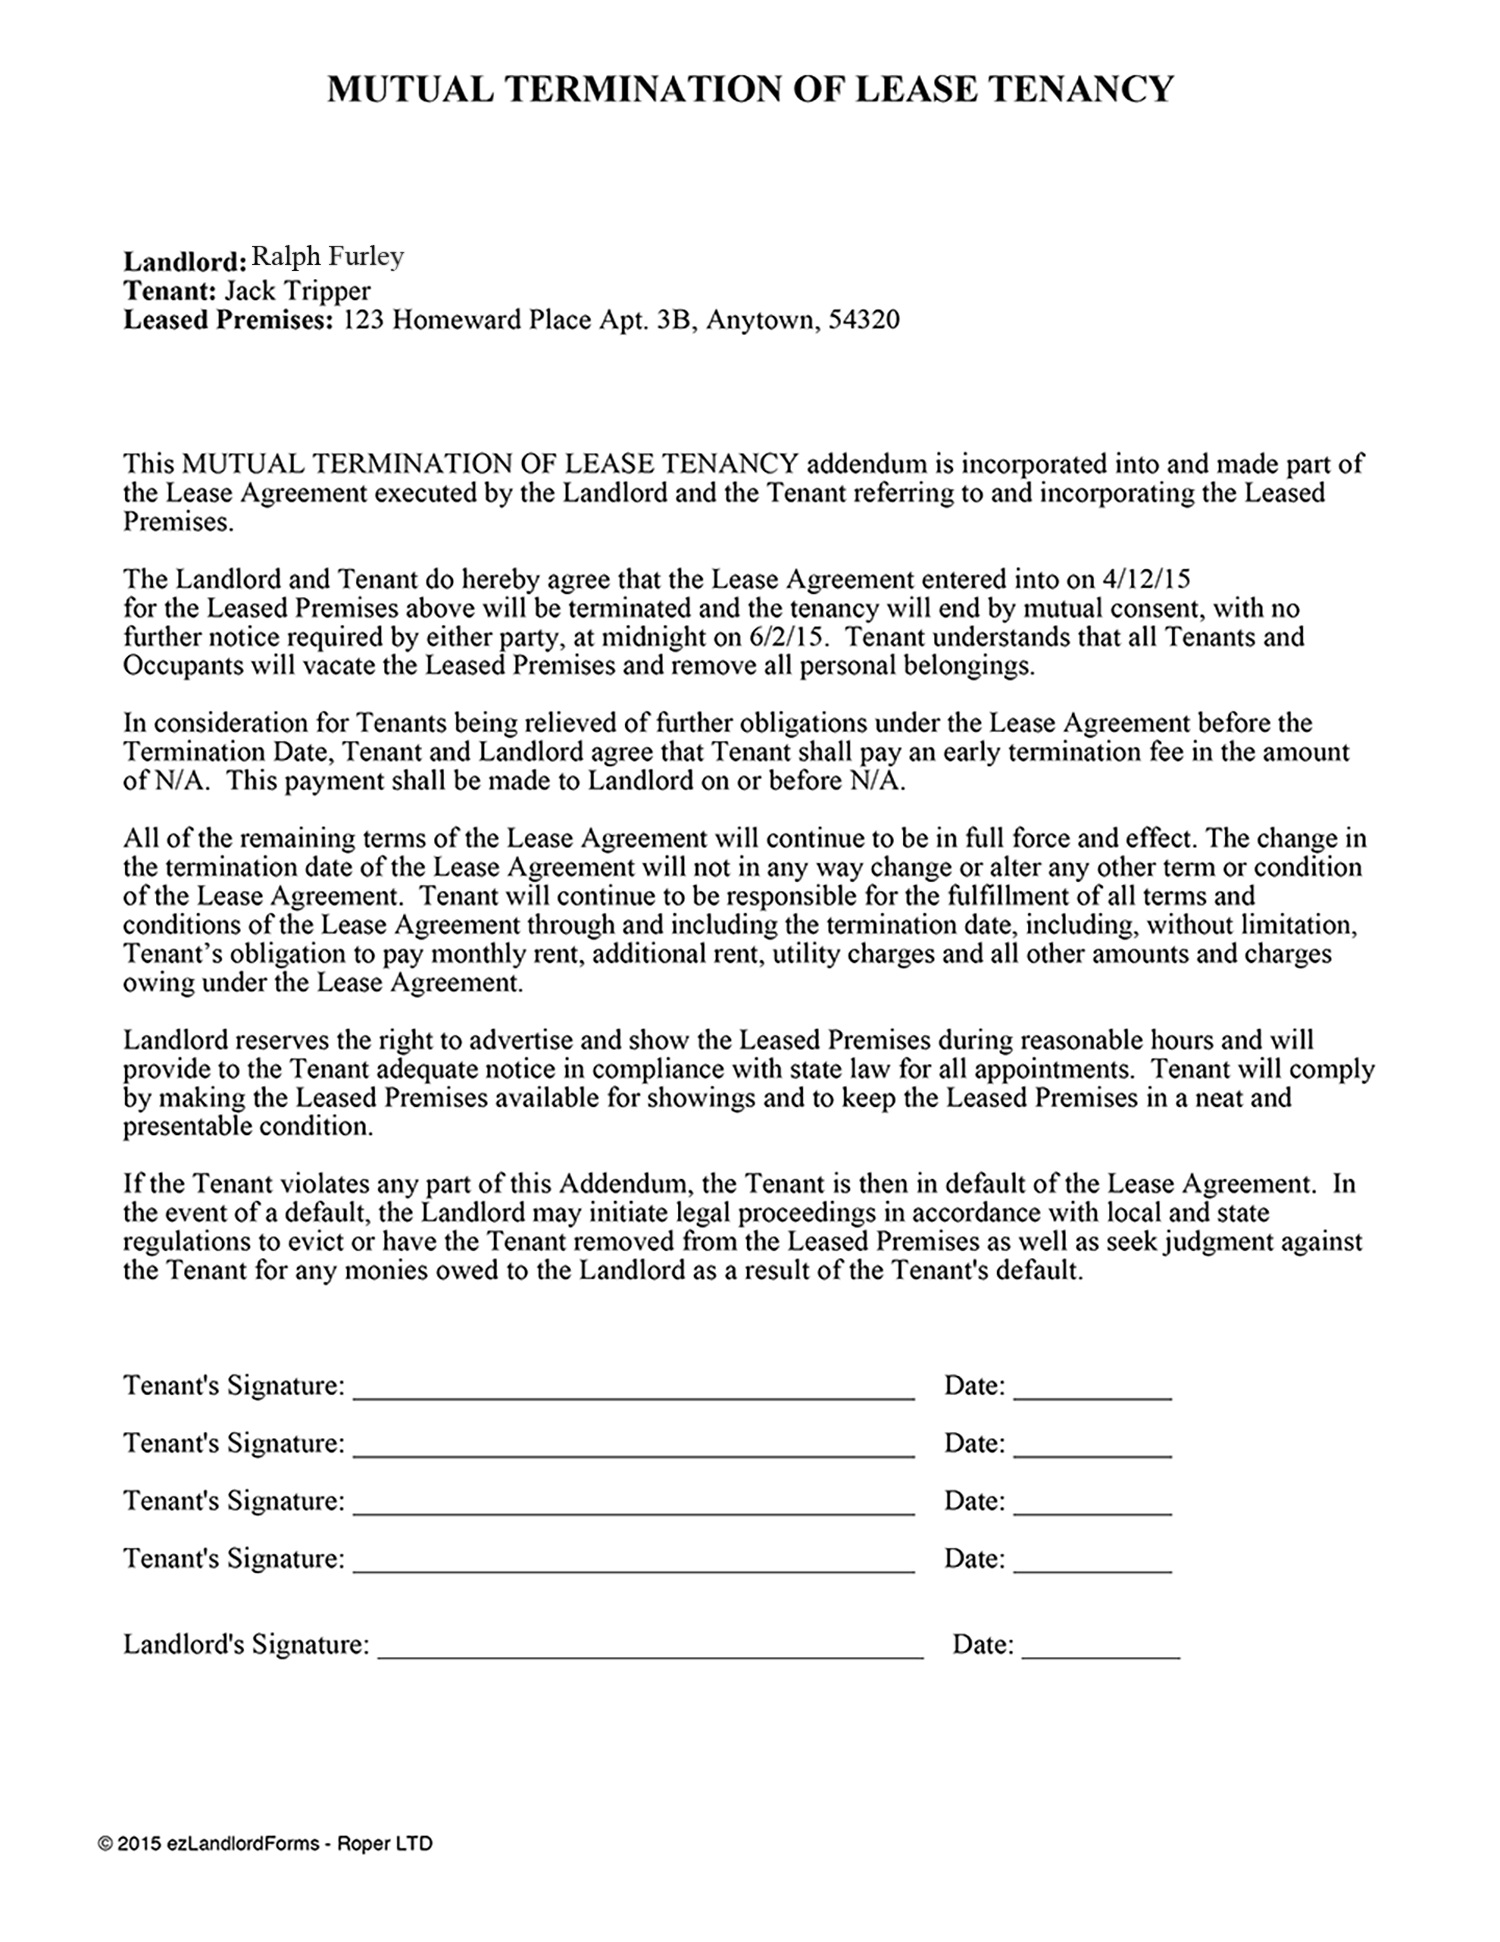 Apartment Lease Termination Letter From Landlord from www.ezlandlordforms.com